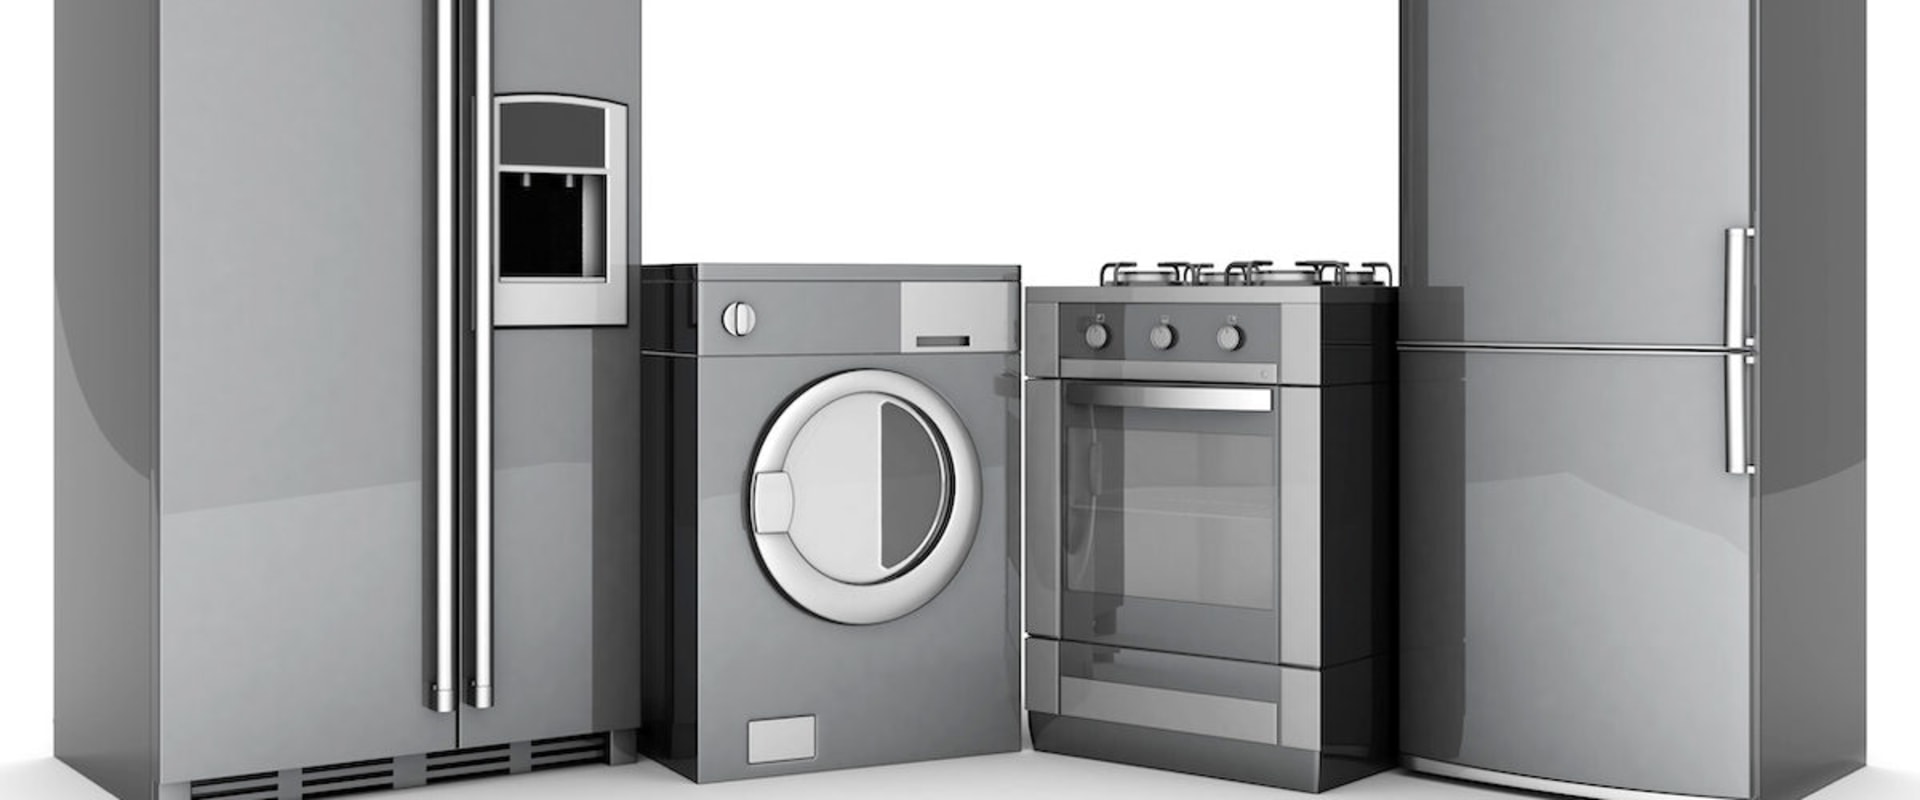 What is the life expectancy of appliances?